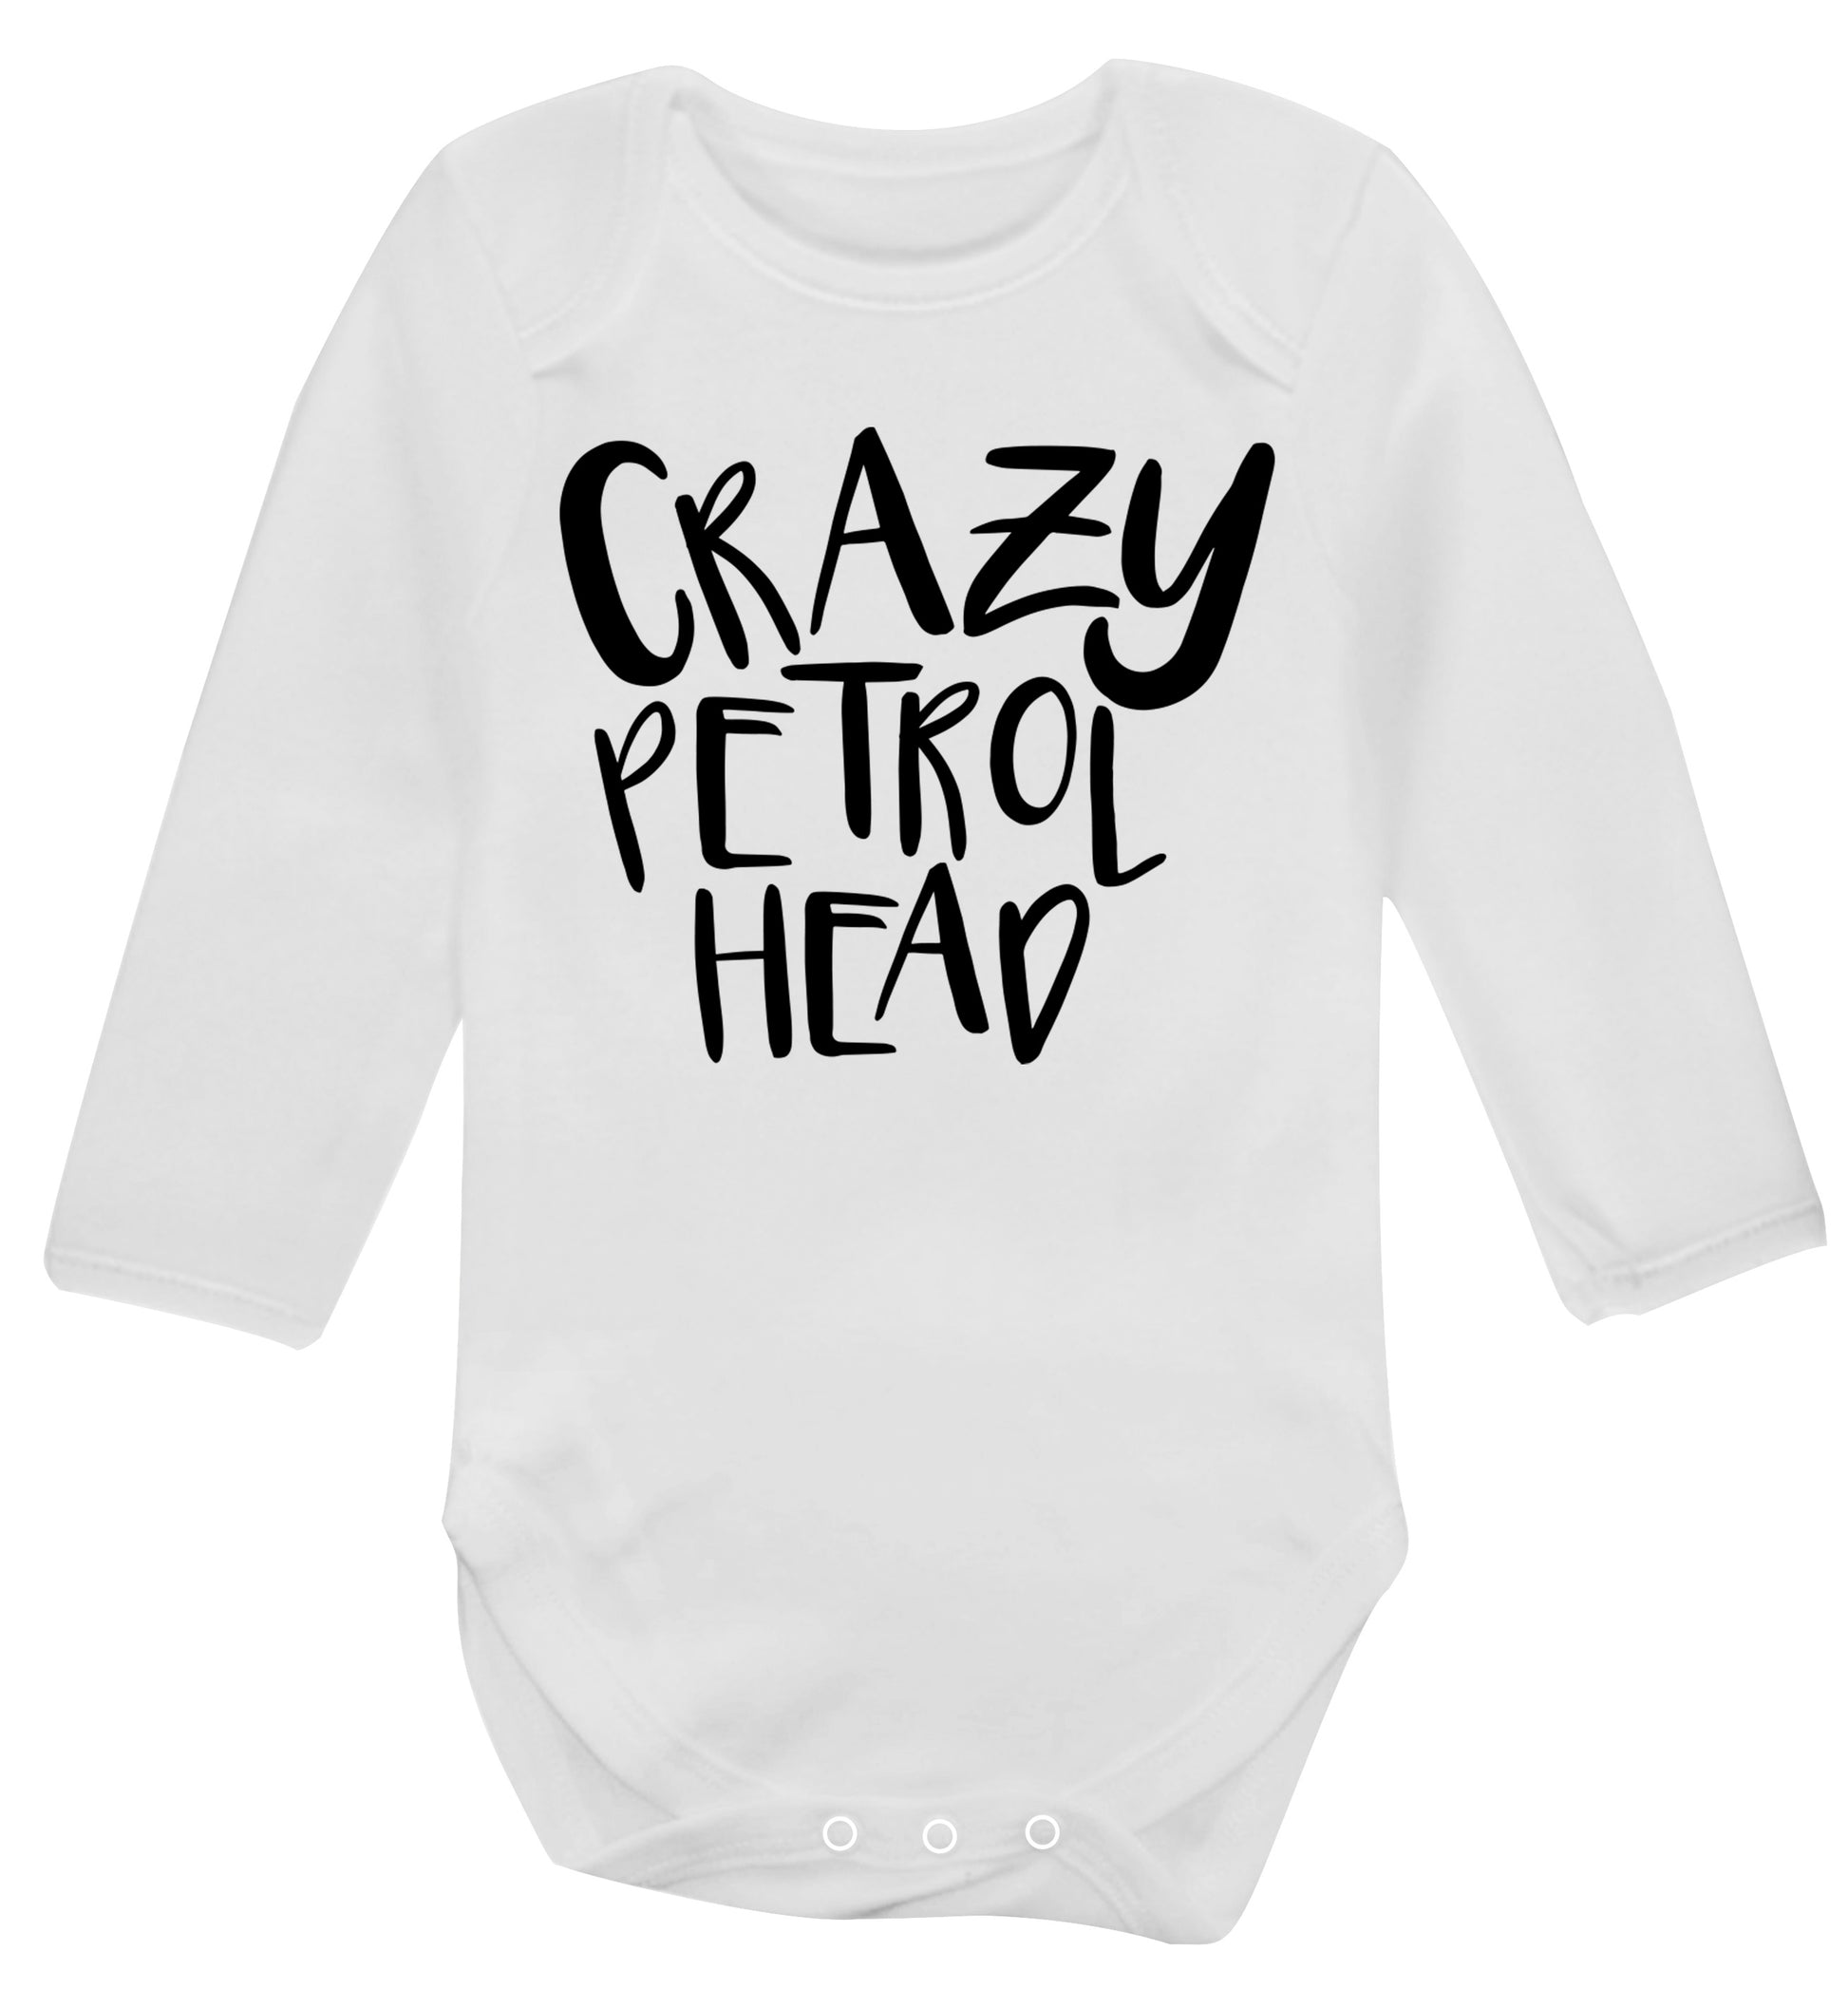 Crazy petrol head Baby Vest long sleeved white 6-12 months